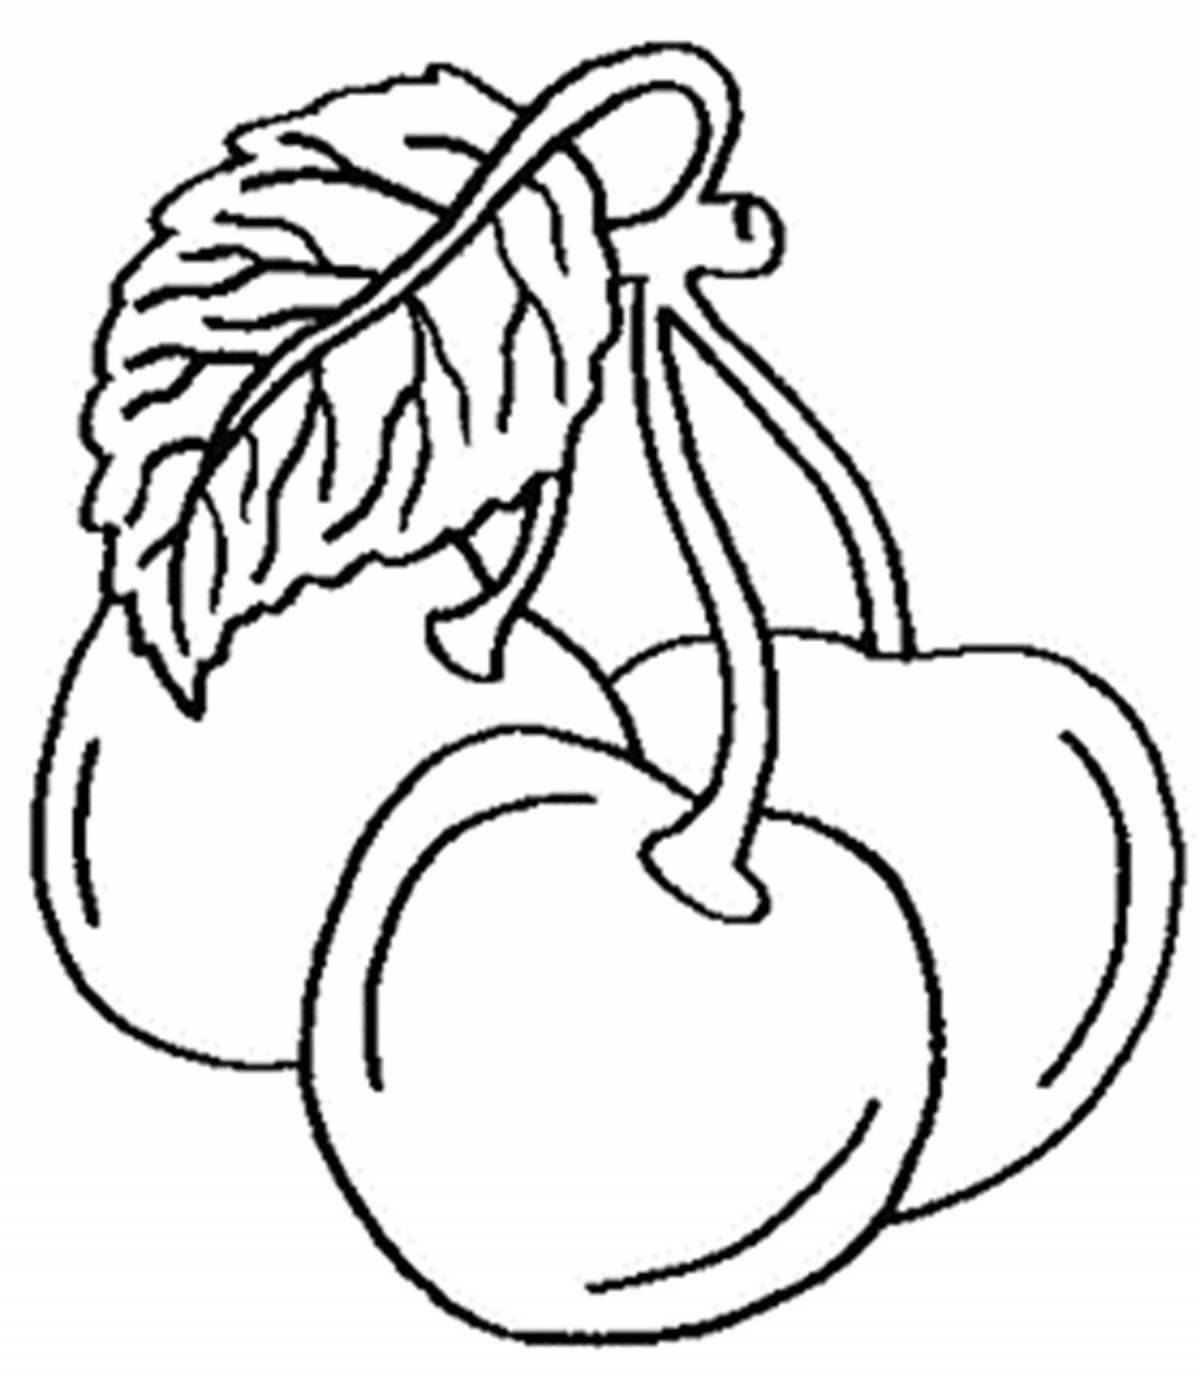 Coloring book favorite fruits and vegetables